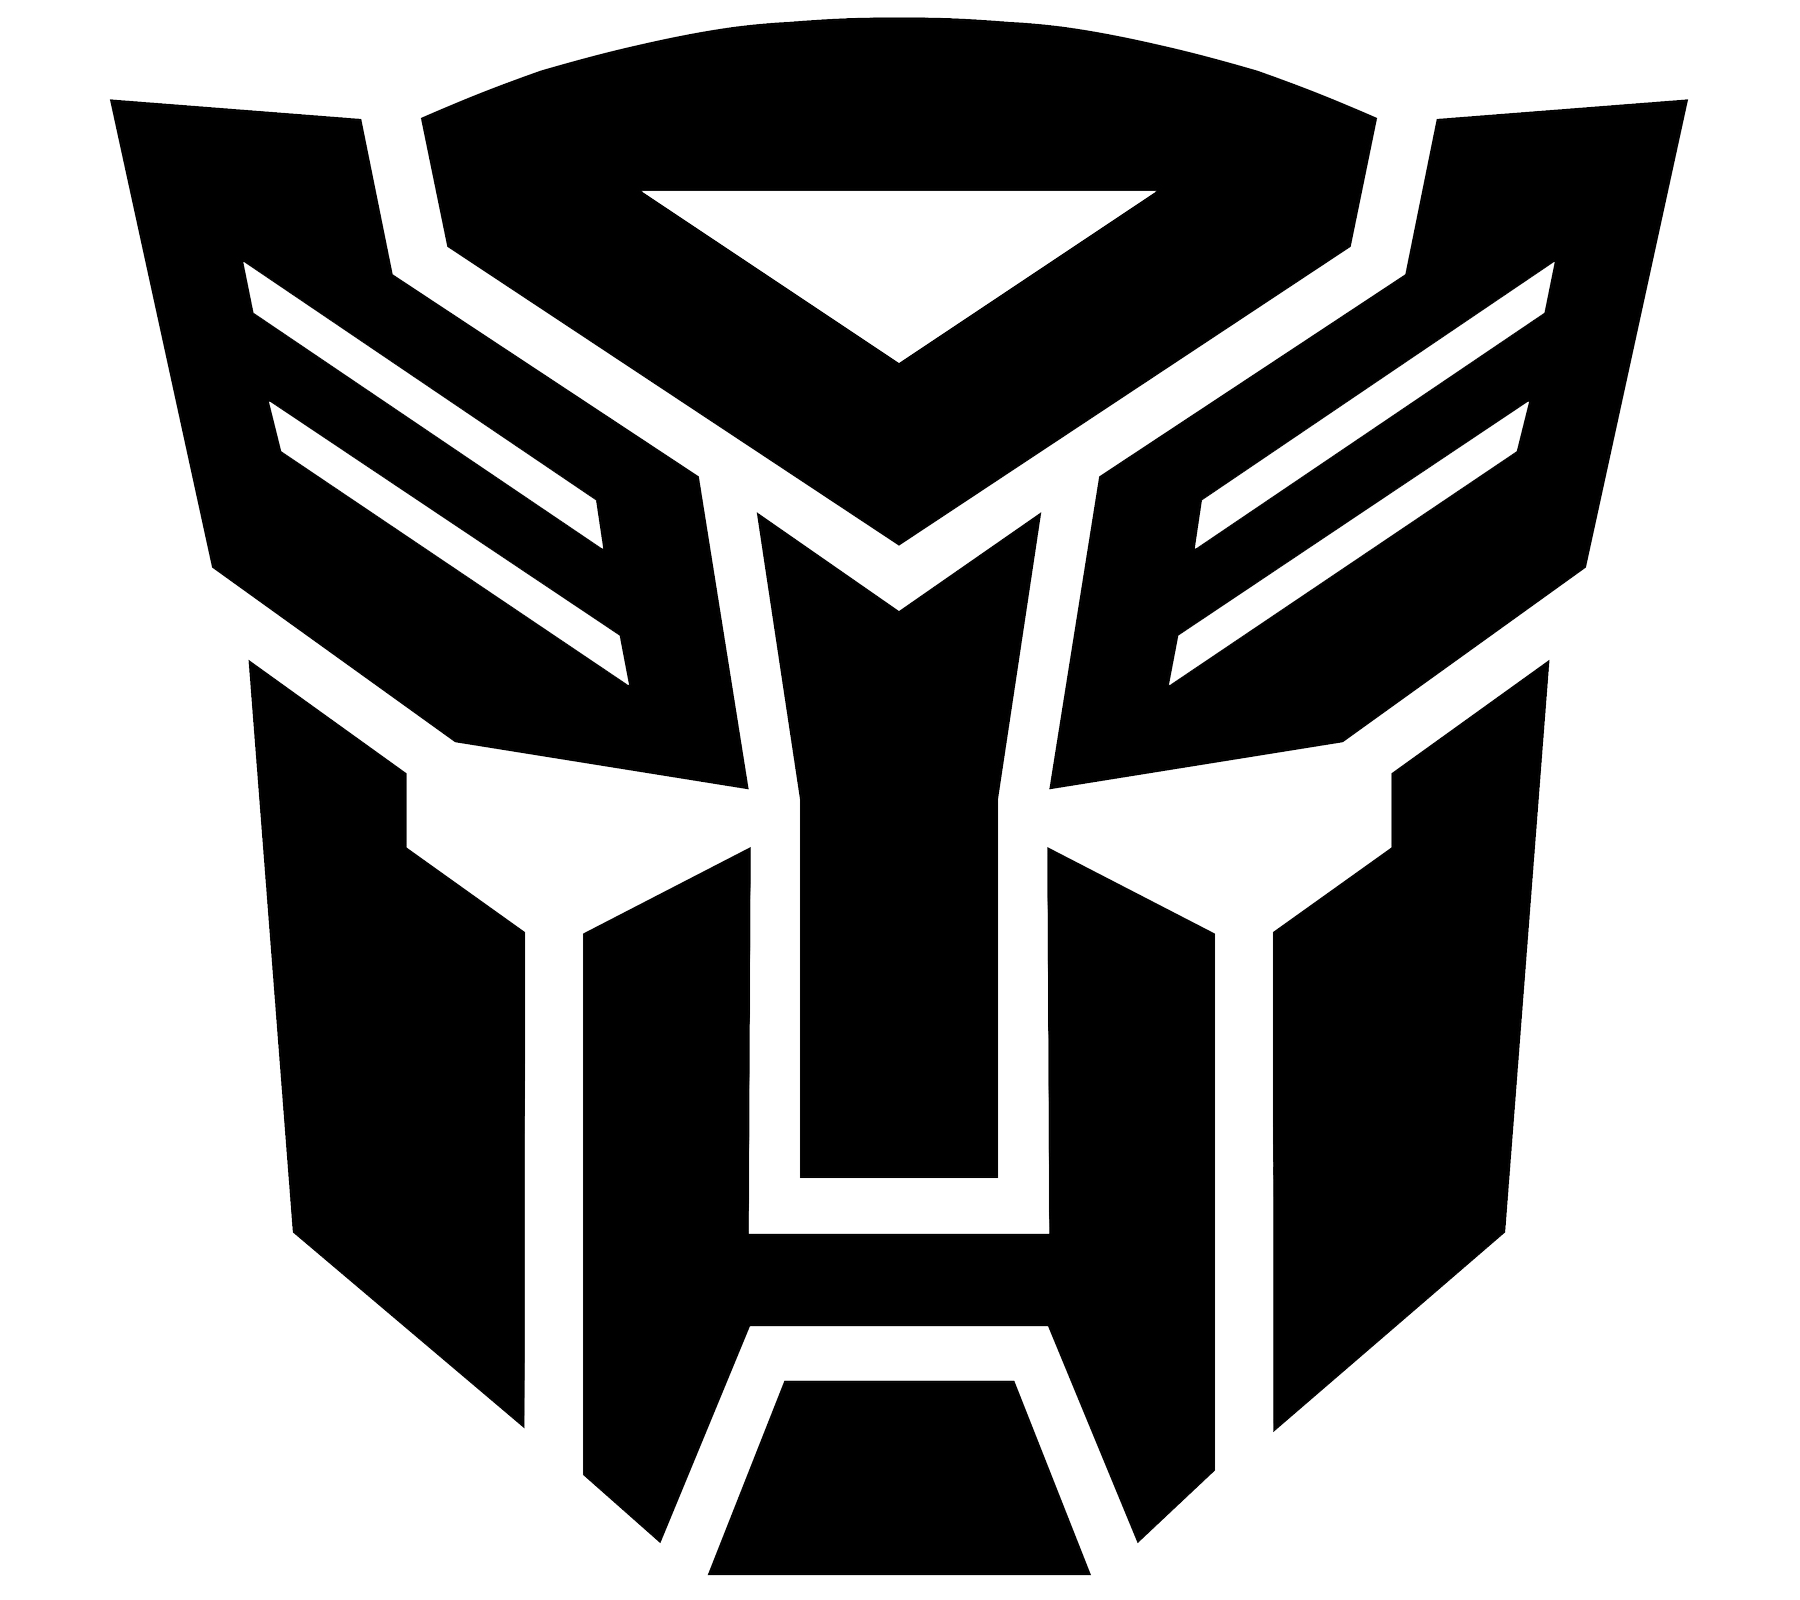 Red Transformer Face Logo - Transformers Logo, symbol meaning, History and Evolution